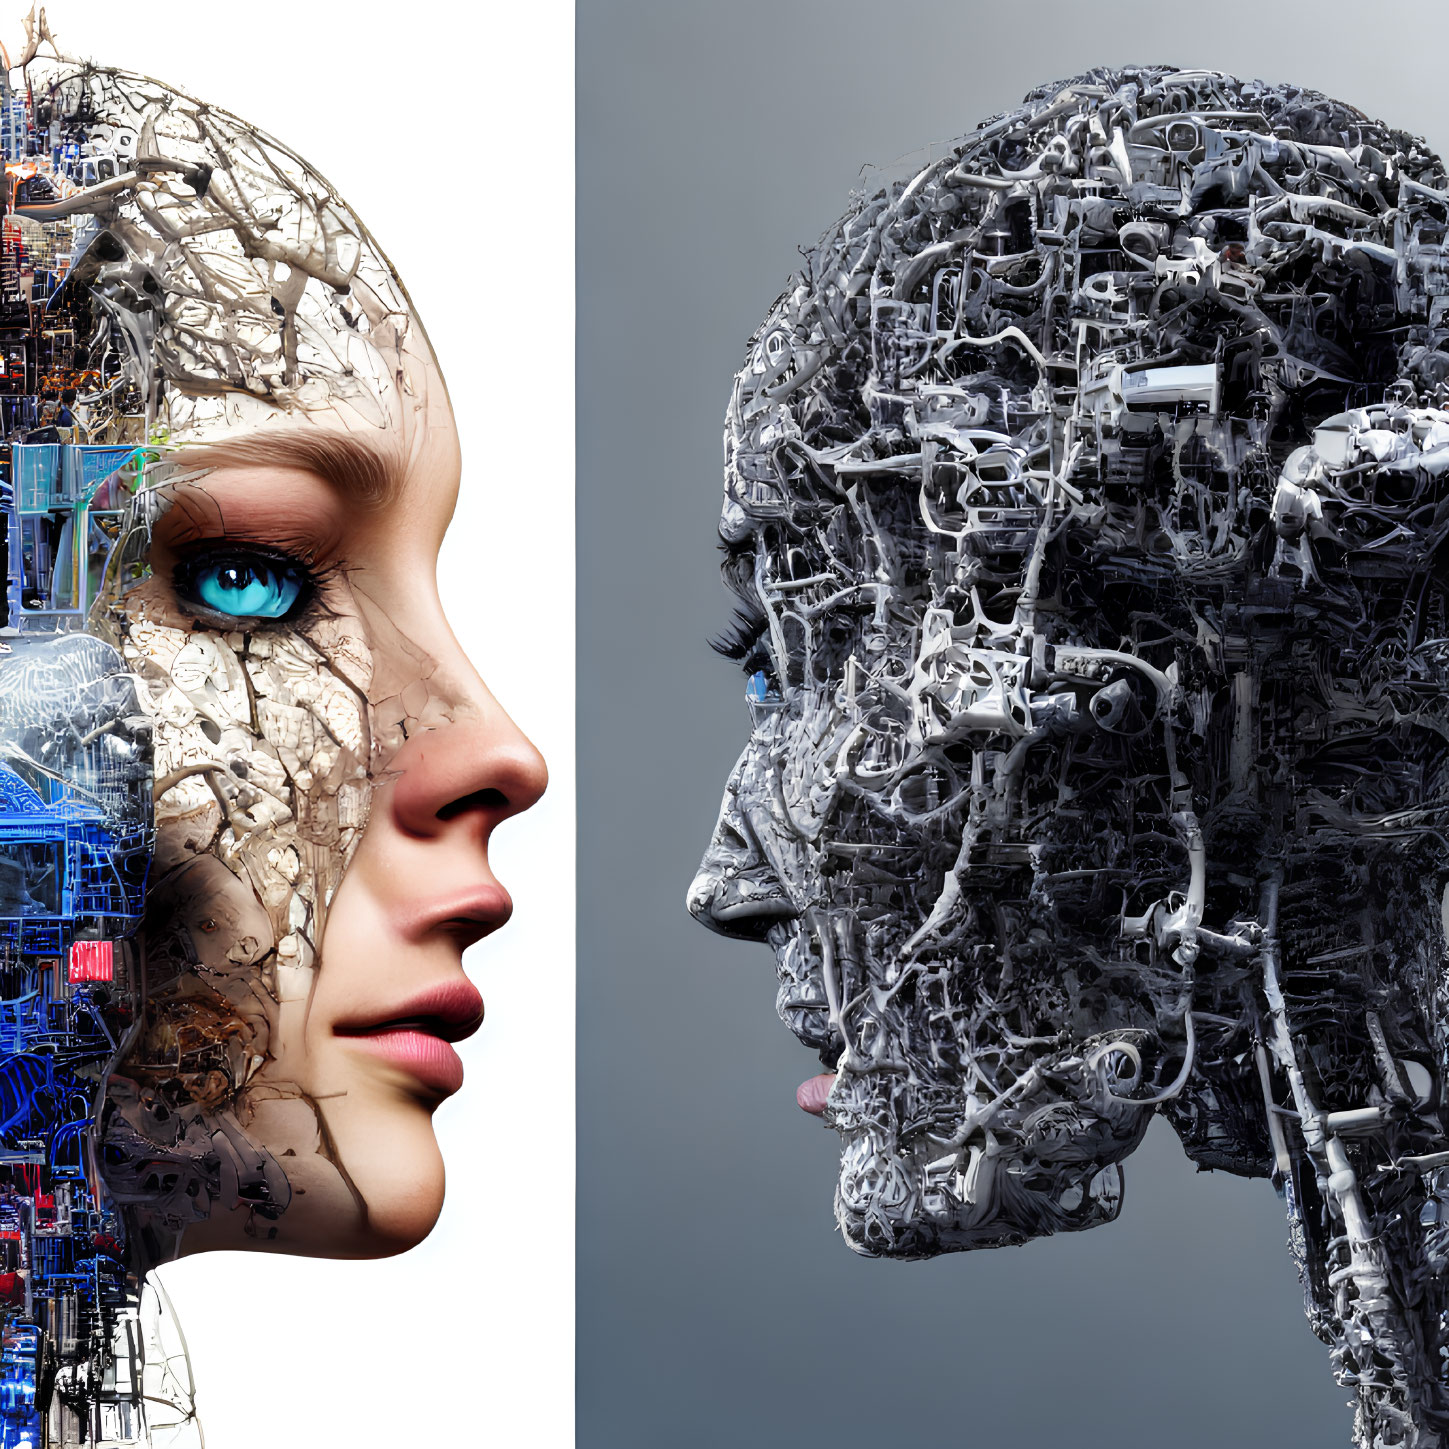 Contrasting profile views: human face vs. mechanical face